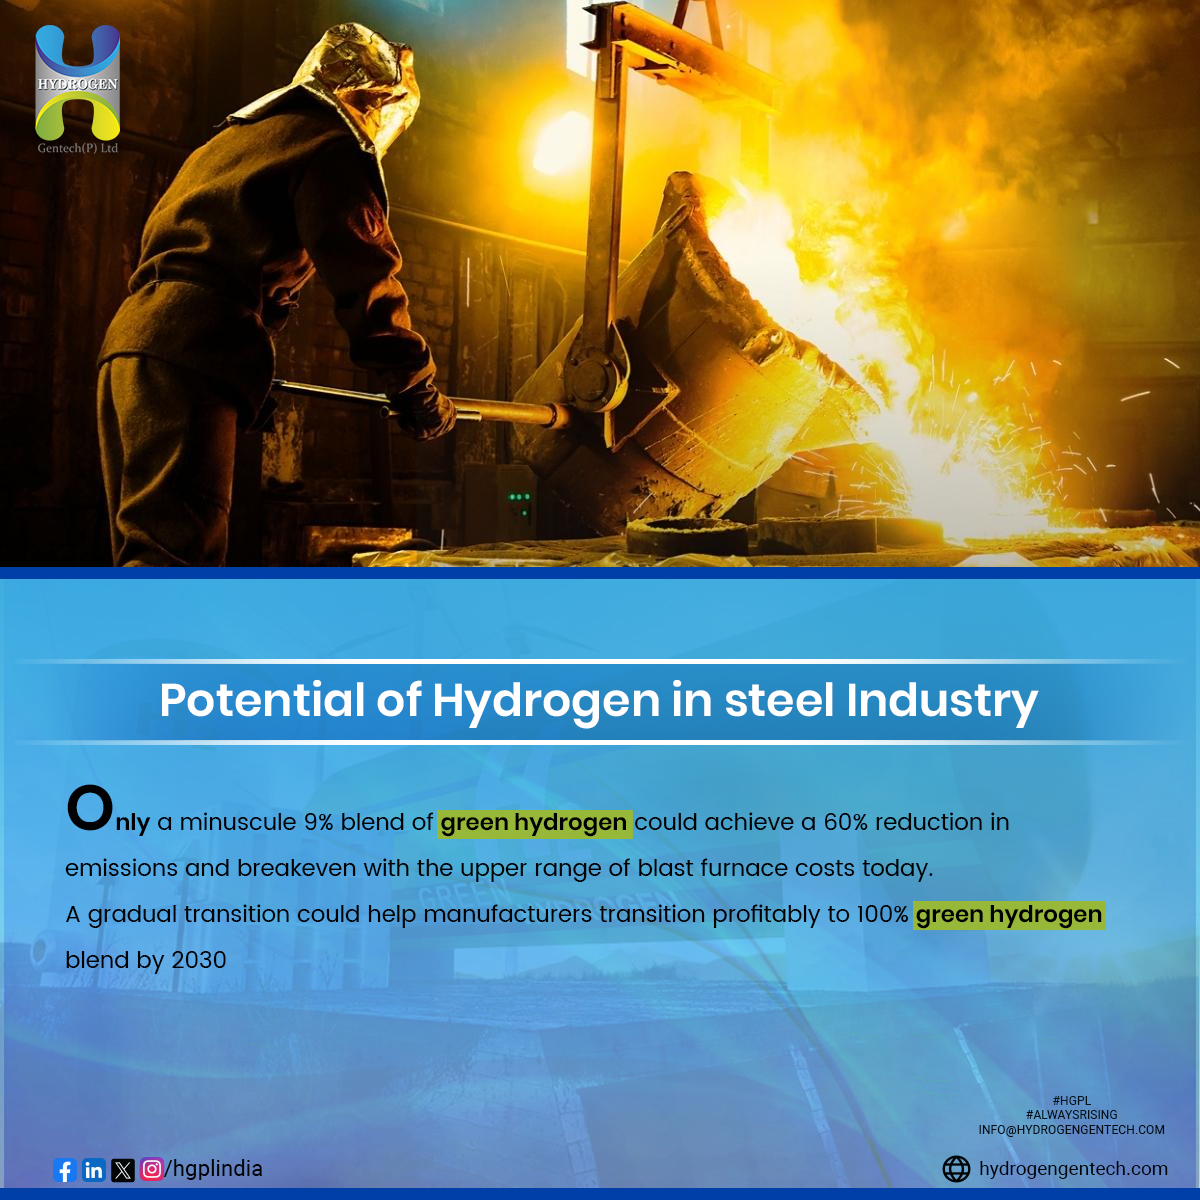 Only a minuscule 9% blend of green hydrogen can achieve a 60% reduction in emissions from the steel industry. This shows the immense potential of green hydrogen in reducing greenhouse gas emissions and making our planet a cleaner and healthier place to live in. #GreenHydrogen